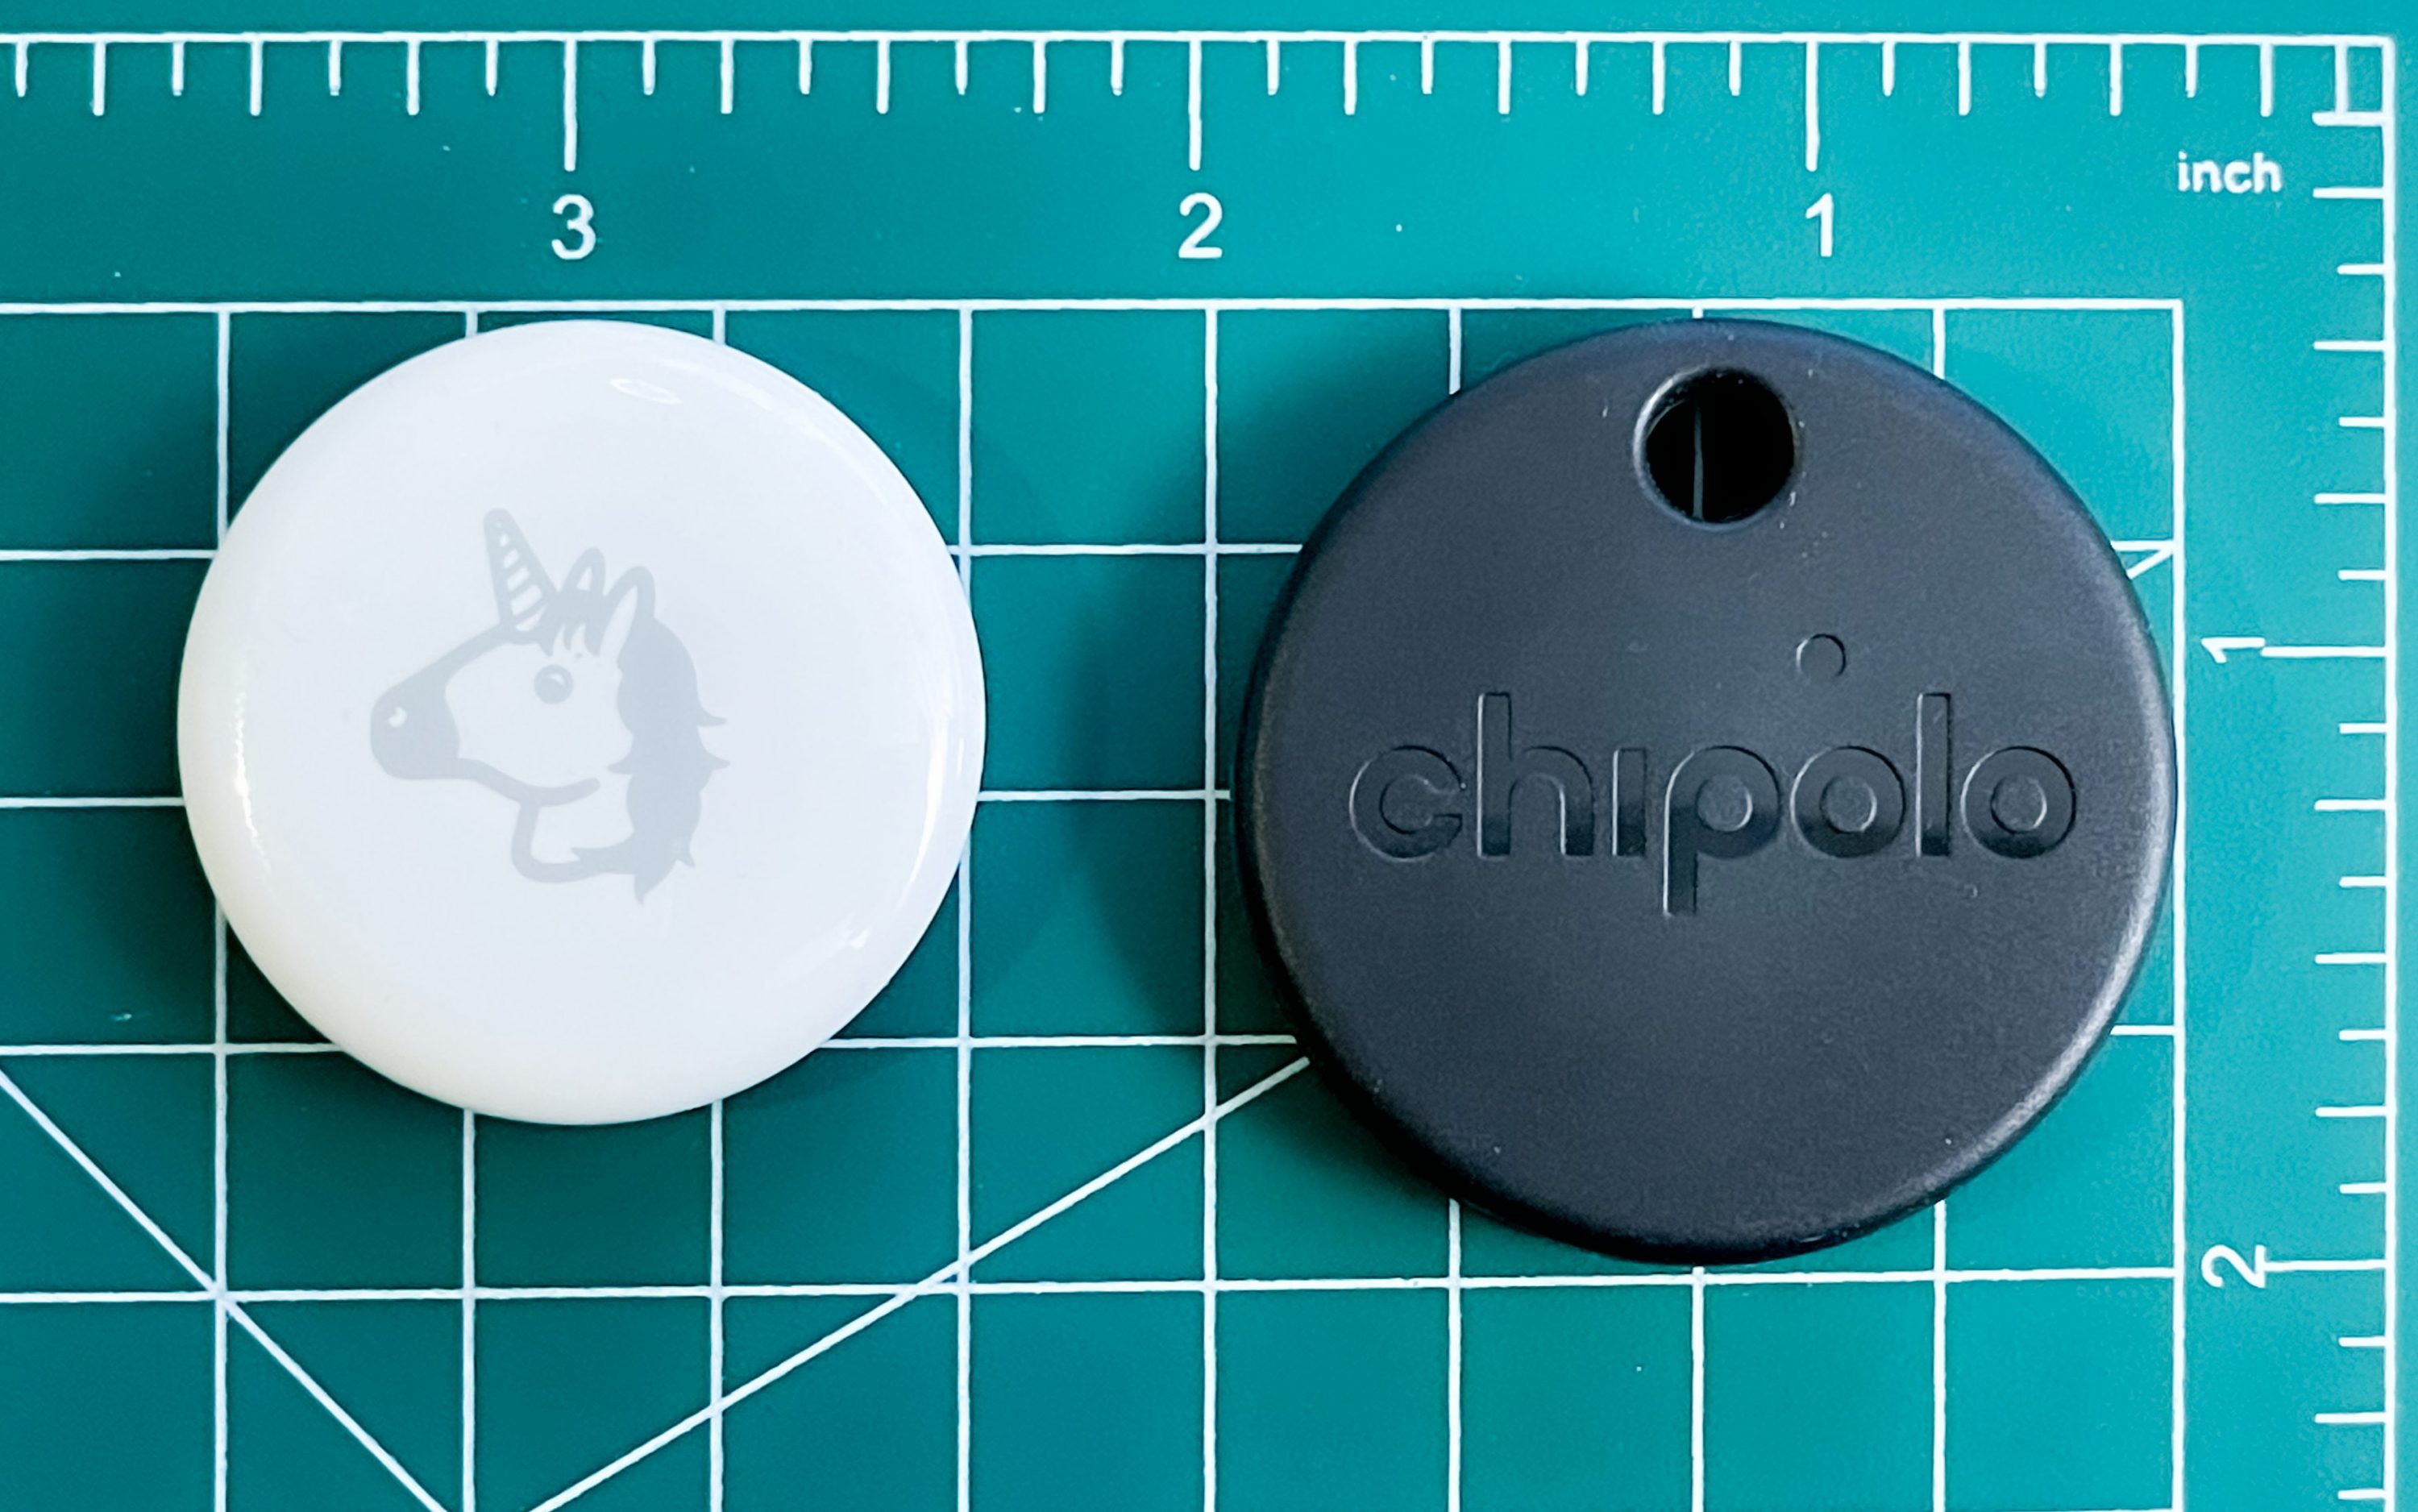 Chipolo Launches CARD Spot Item Tracker With Find My Support For